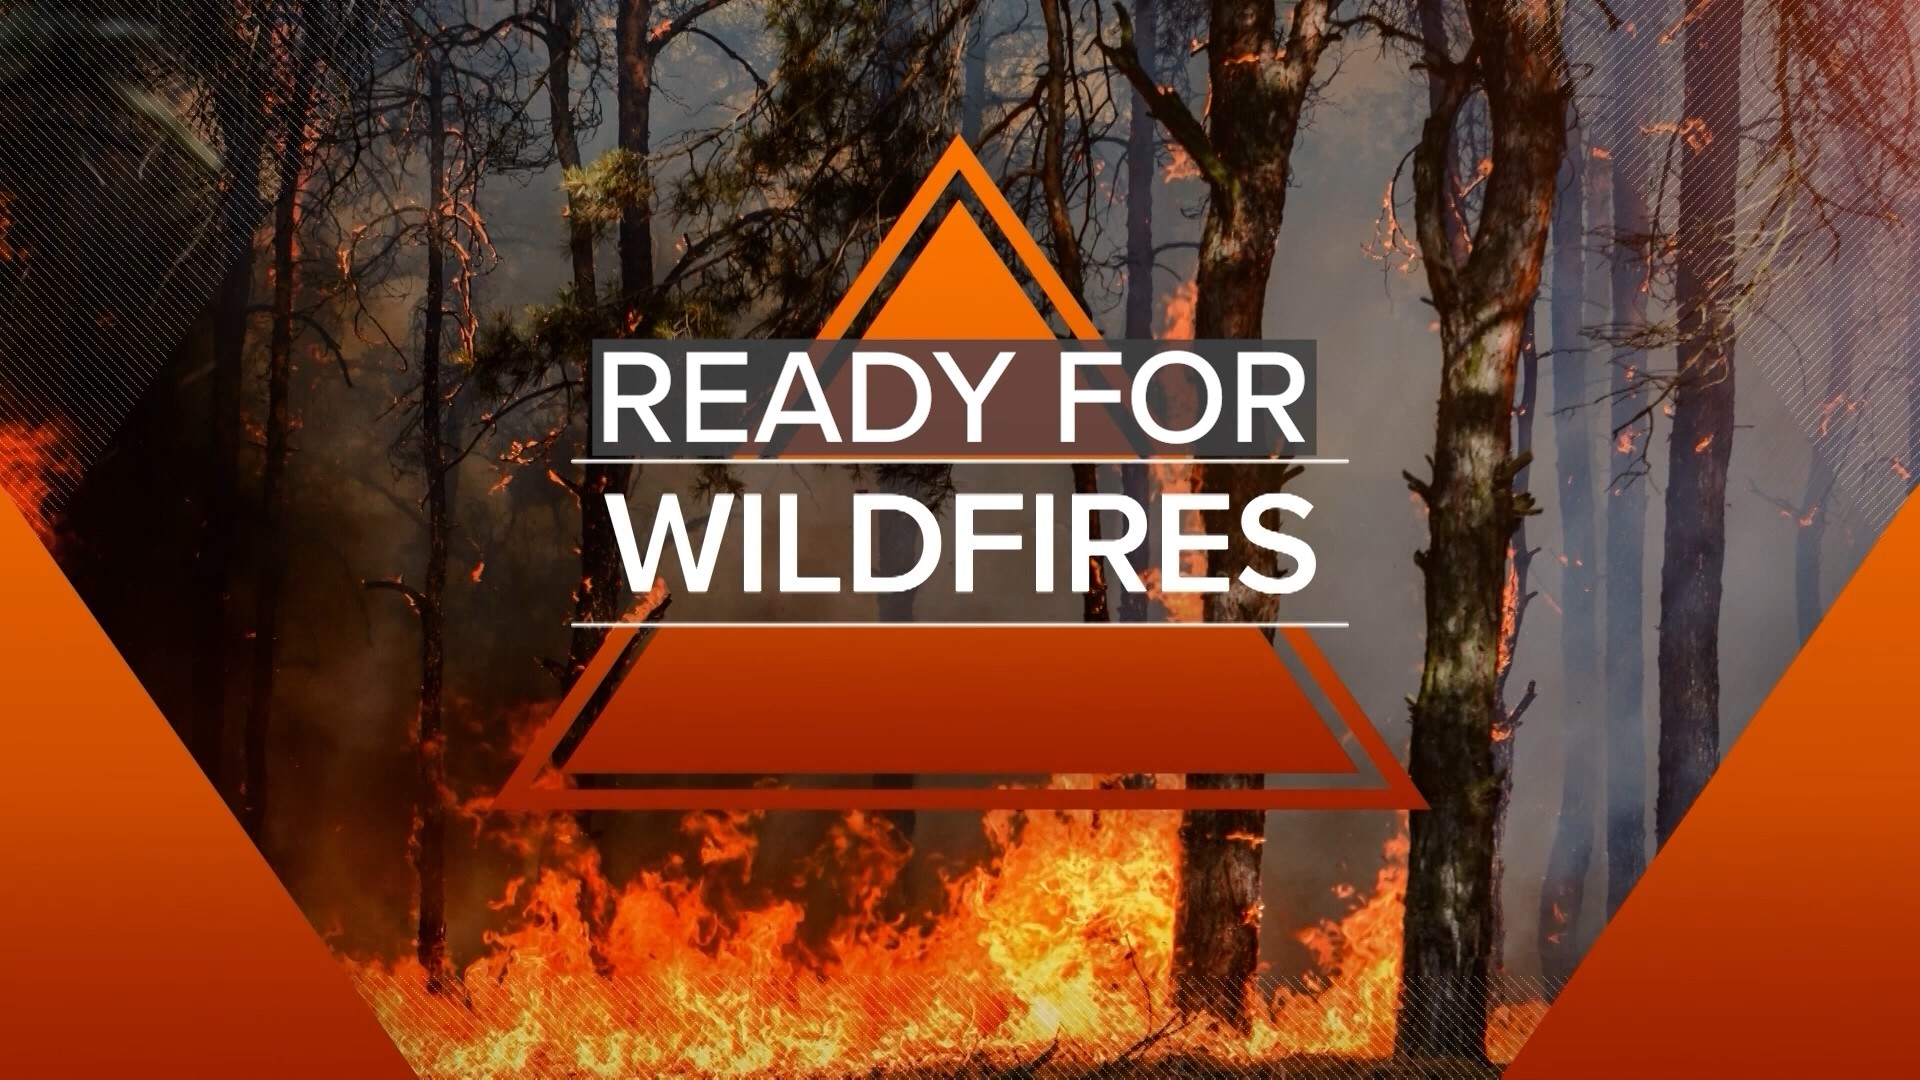 With significant fire potential in Washington and Idaho, KREM 2 Chief Meteorologist Jeremy LaGoo has a look at what to expect this wildfire season in the northwest.